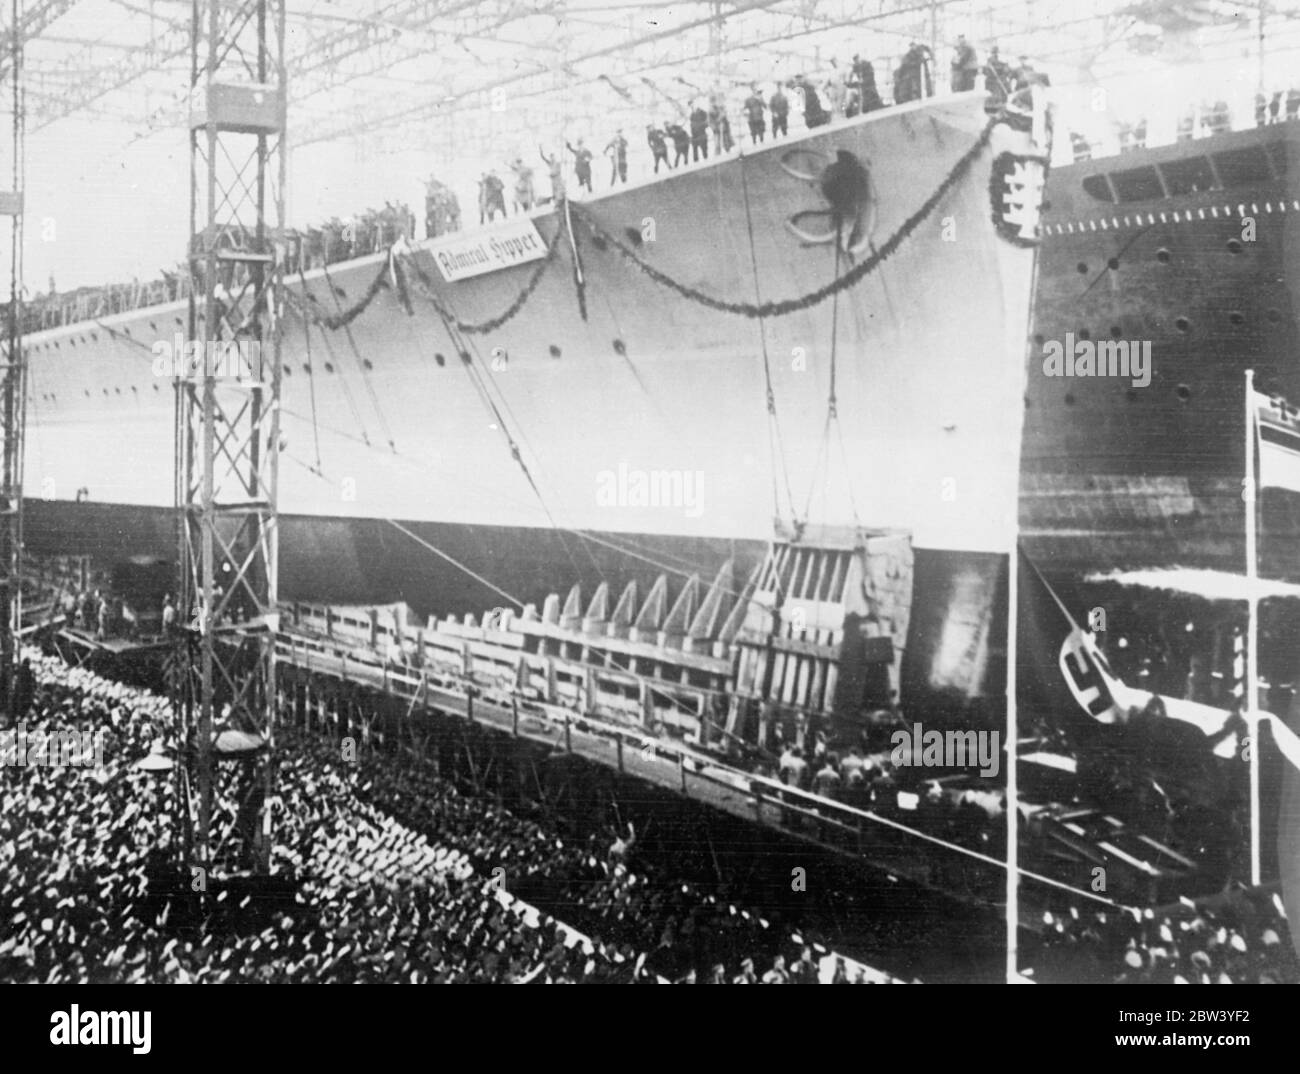 New 10,000 ton Germane cruiser launched , named after Adml who bombarded Hartlepool . The ' Admiral hipper ' , first of three 10,000 t cruisers included in Germany ' s building programme after the conclusion of the Naval agreement with Britain , was launched at the hamburg shipyards at Blohm and Voss . She will be armed with 8 inch guns . The new cruiser was named by Frau Raeder , wife of the Commander in Chief of the German Navy . 8 February 1936 Adml hipper commanded the battlecruisers Seydlitz , Moltke and Blucher at the bombardment of Hartlepool on 16 December , 1914 , and later led the Ge Stock Photo